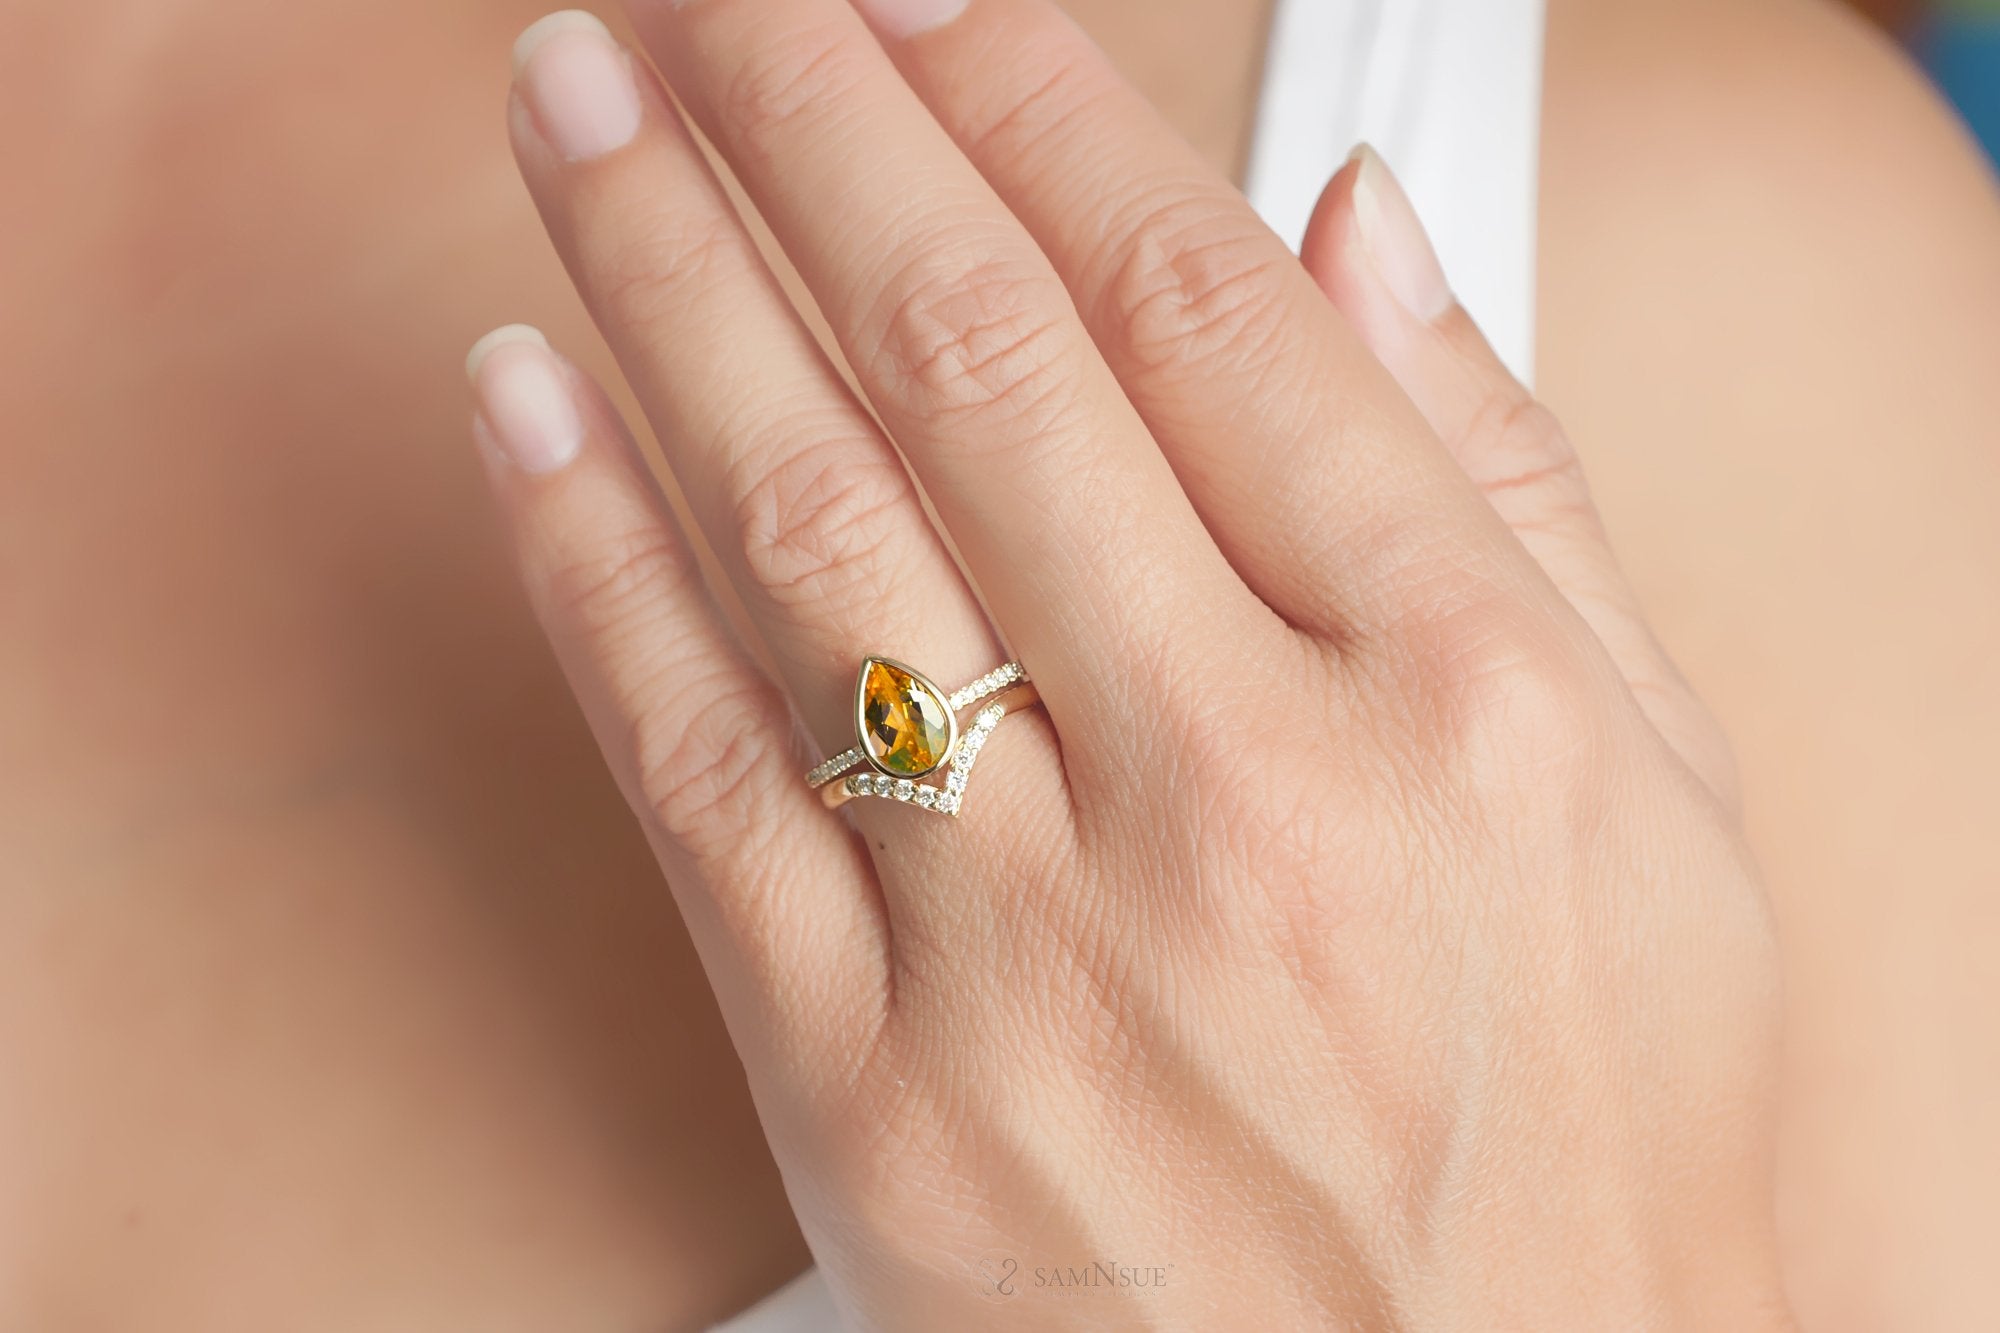 Yellow Citrine engagement ring-Solid 14k White gold-handmade diamond ring-Halo  Pear cut citrine ring -6x9mm birthstone promise ring for her